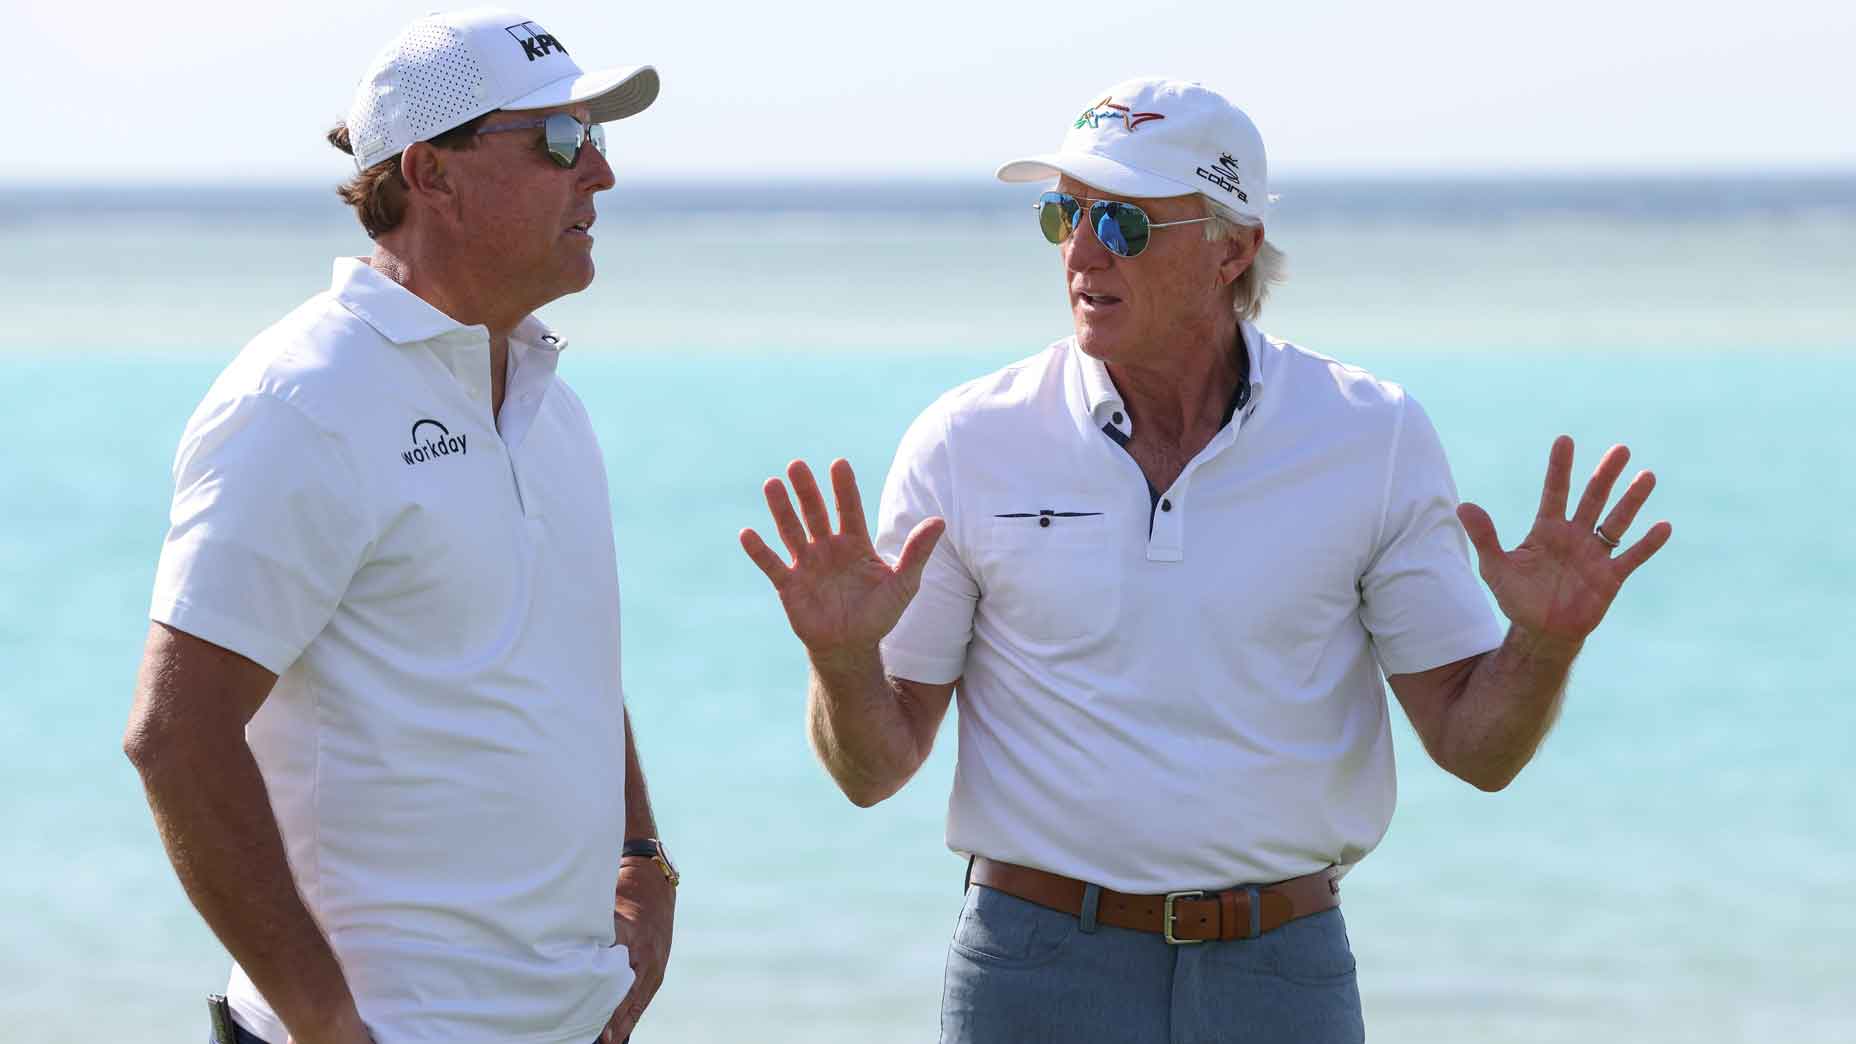 He did make a mistake': Greg Norman reacts to Mickelson controversy